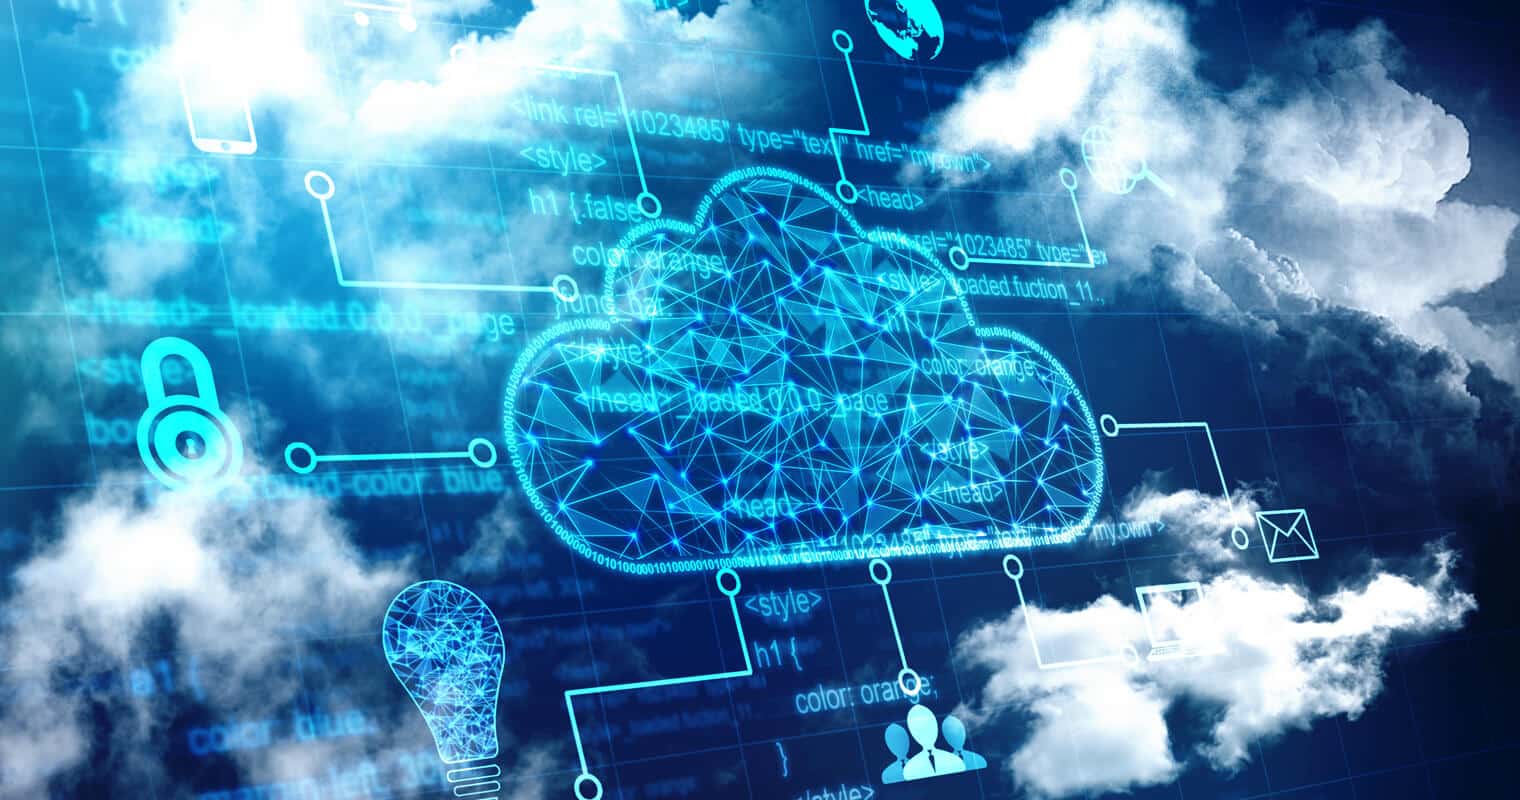 Digital illustration of cloud services showing a stylized cloud composed of connected nodes and lines, representing a network, with icons symbolizing security, data, and communication against a backdrop of clouds in the sky.